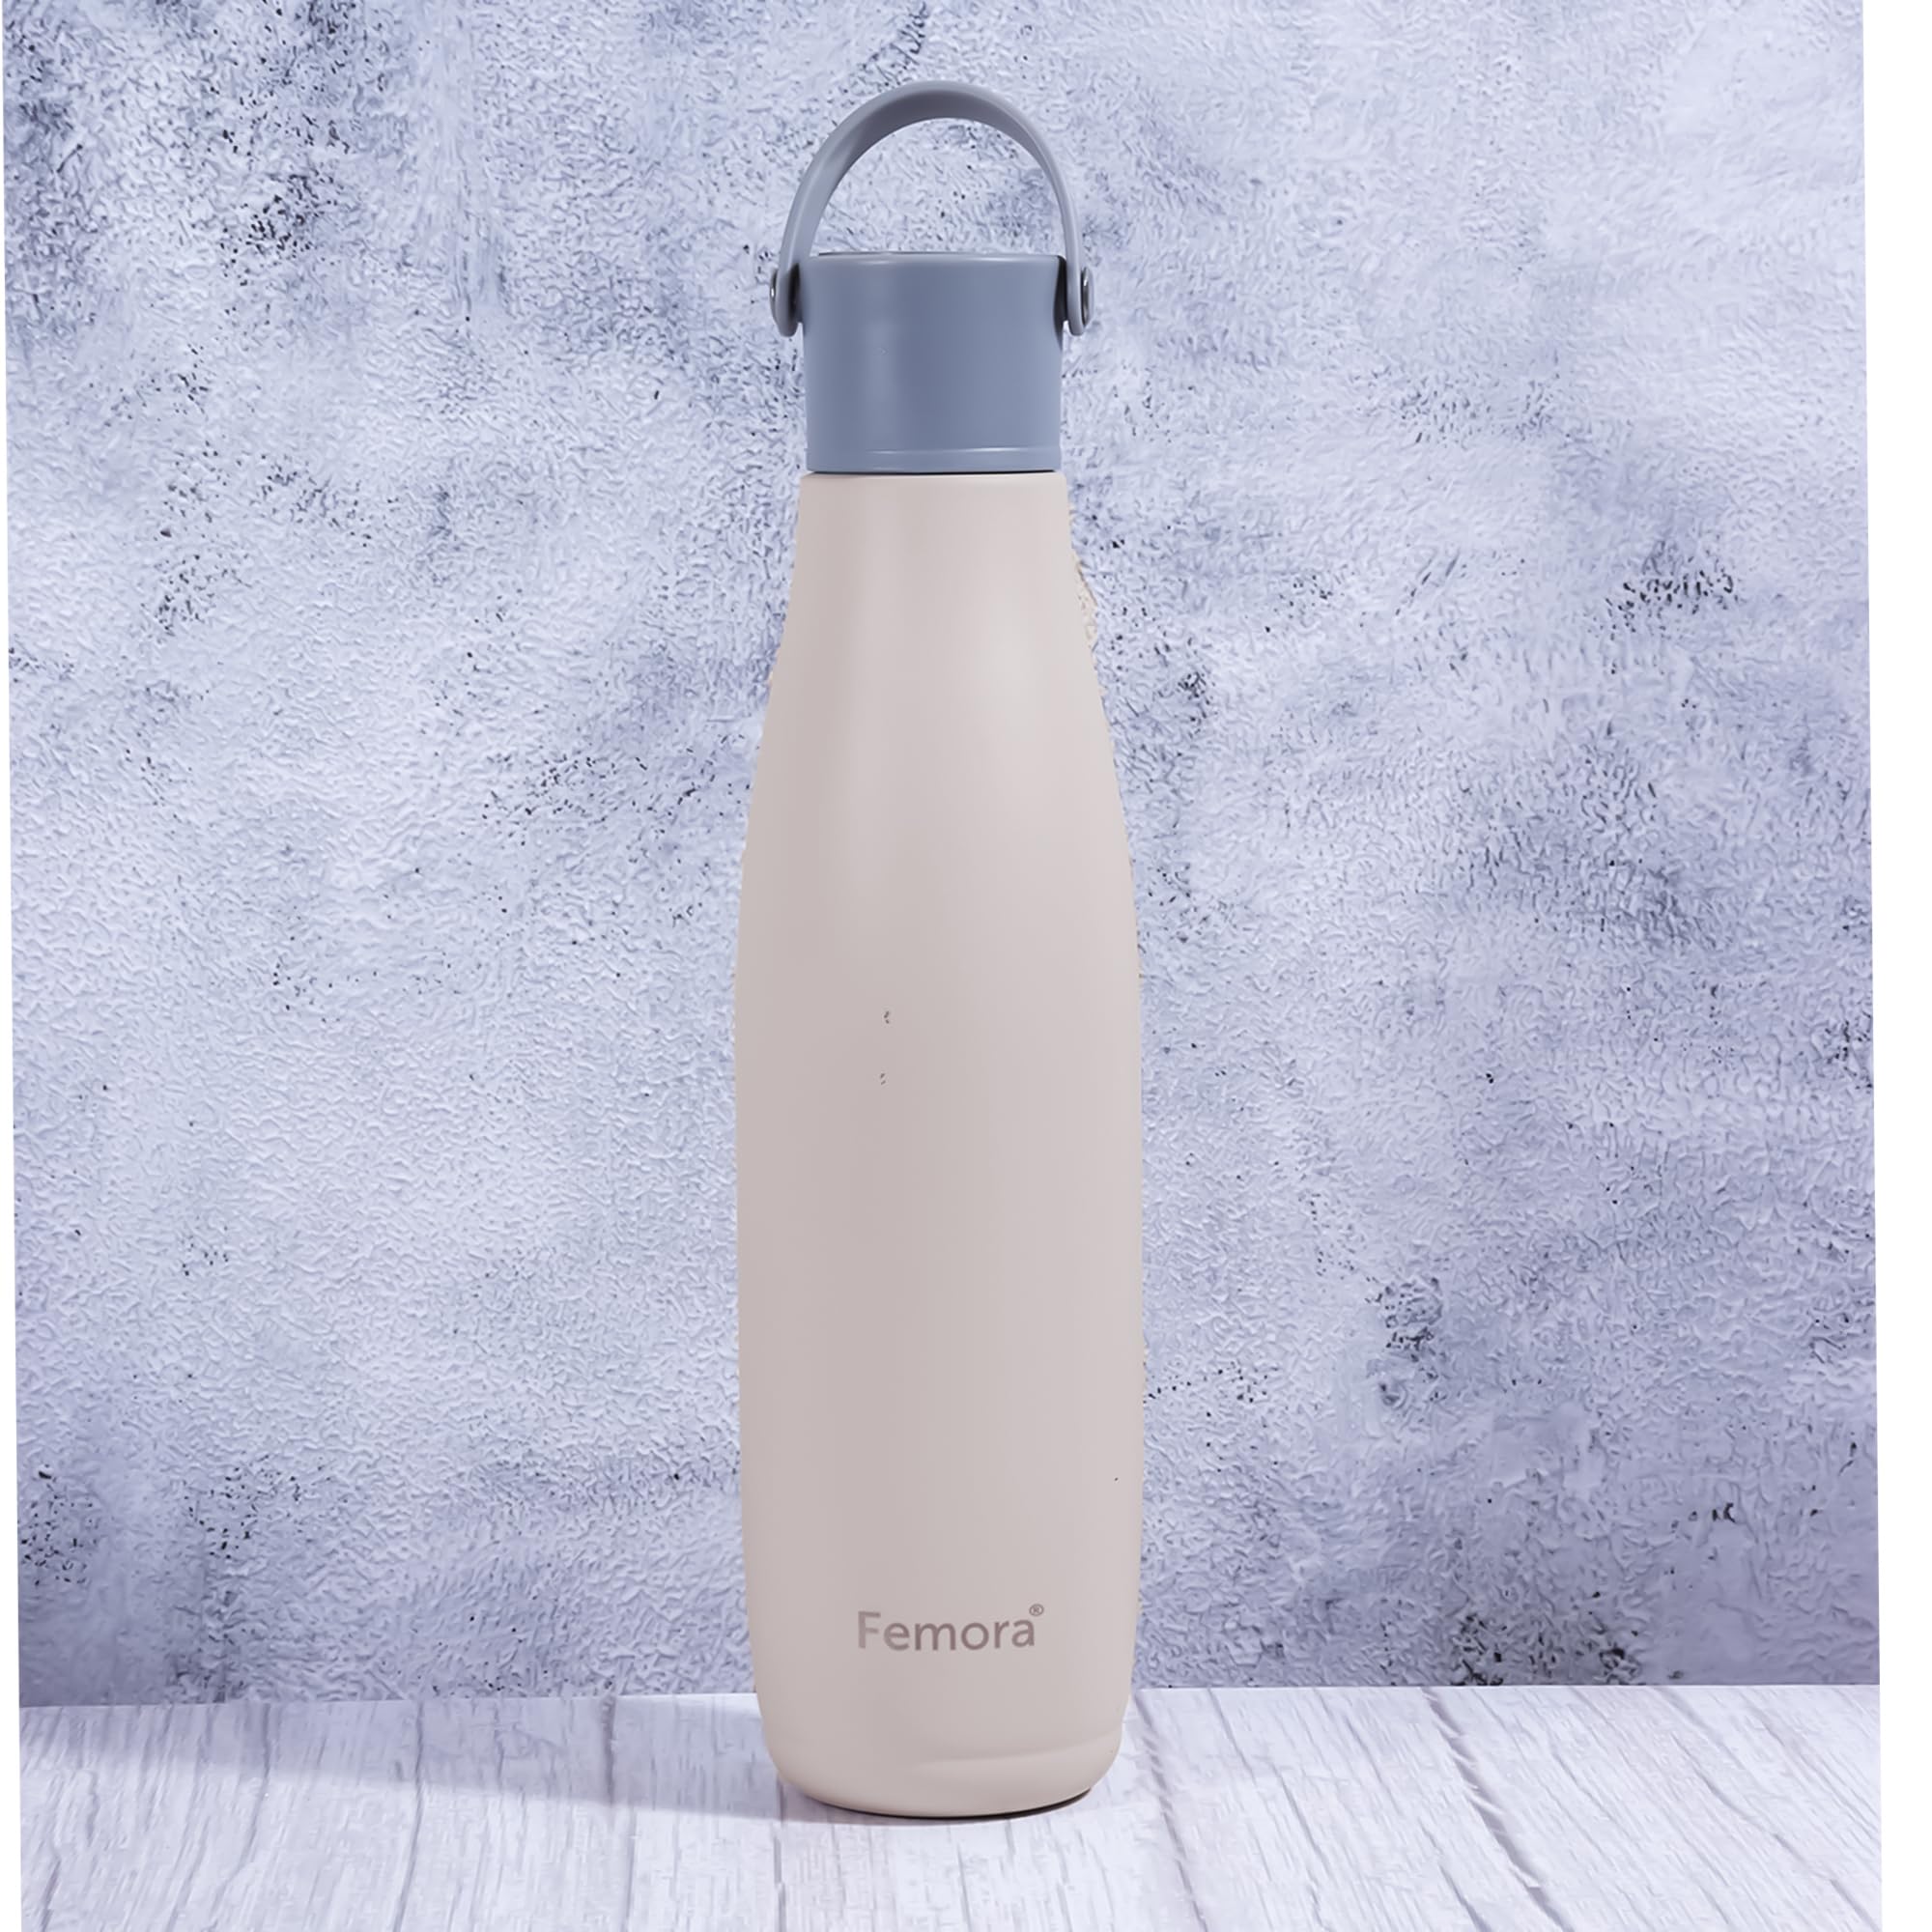 Stainless Steel PureQuench Lifestyle Vessel Vacuum Insulated Flask Water Bottle, 700 ML, Pastel Grey, Femora